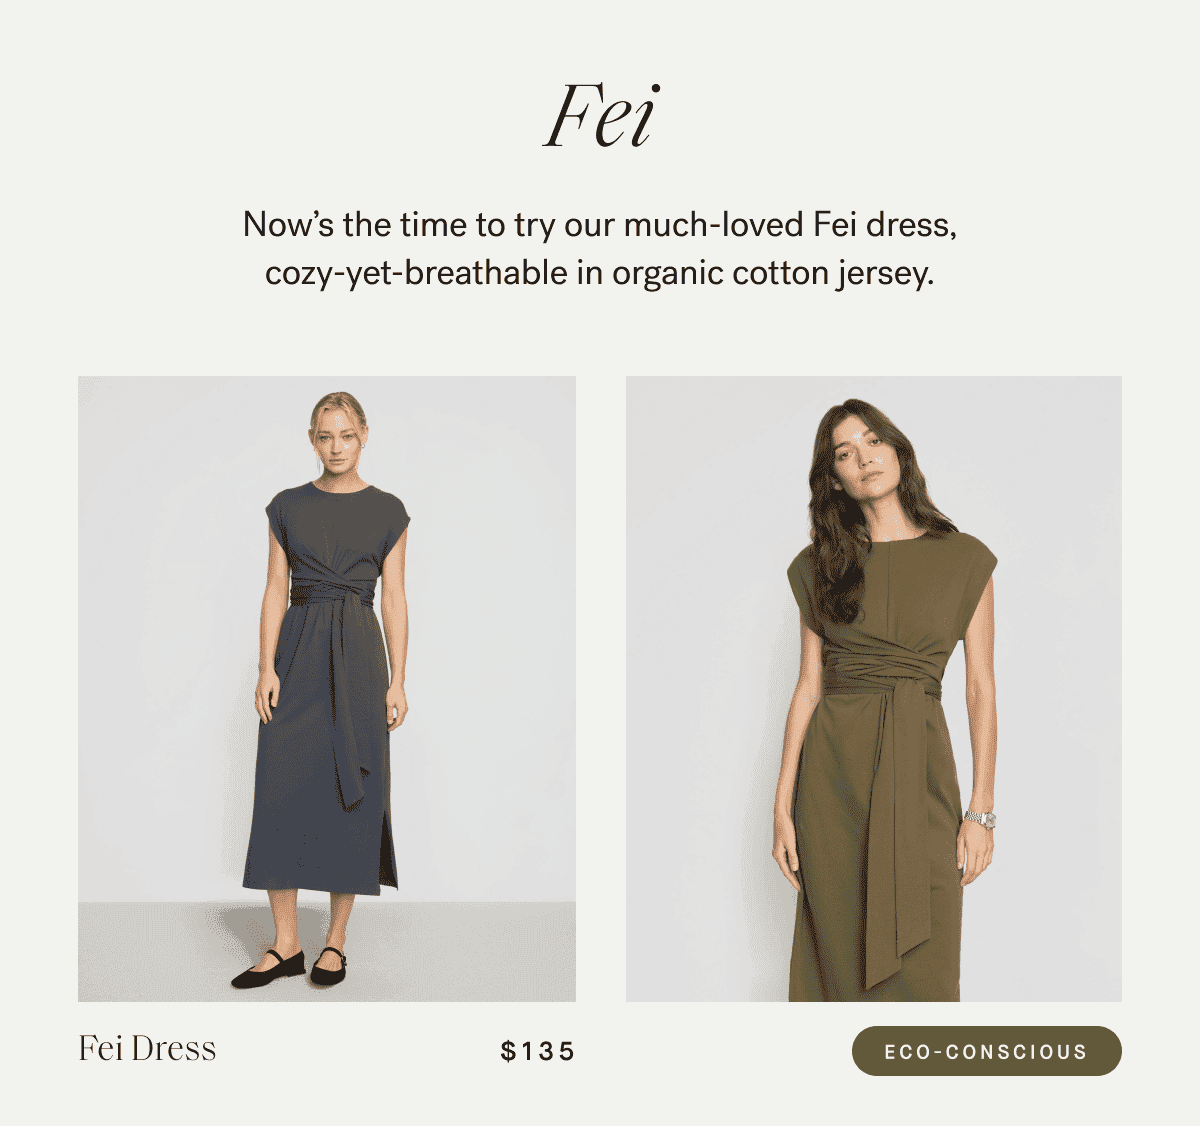 Fei —\xa0Now's the time to try our much-loved Fei dress, cozy-yet-breathable in organic cotton jersey.